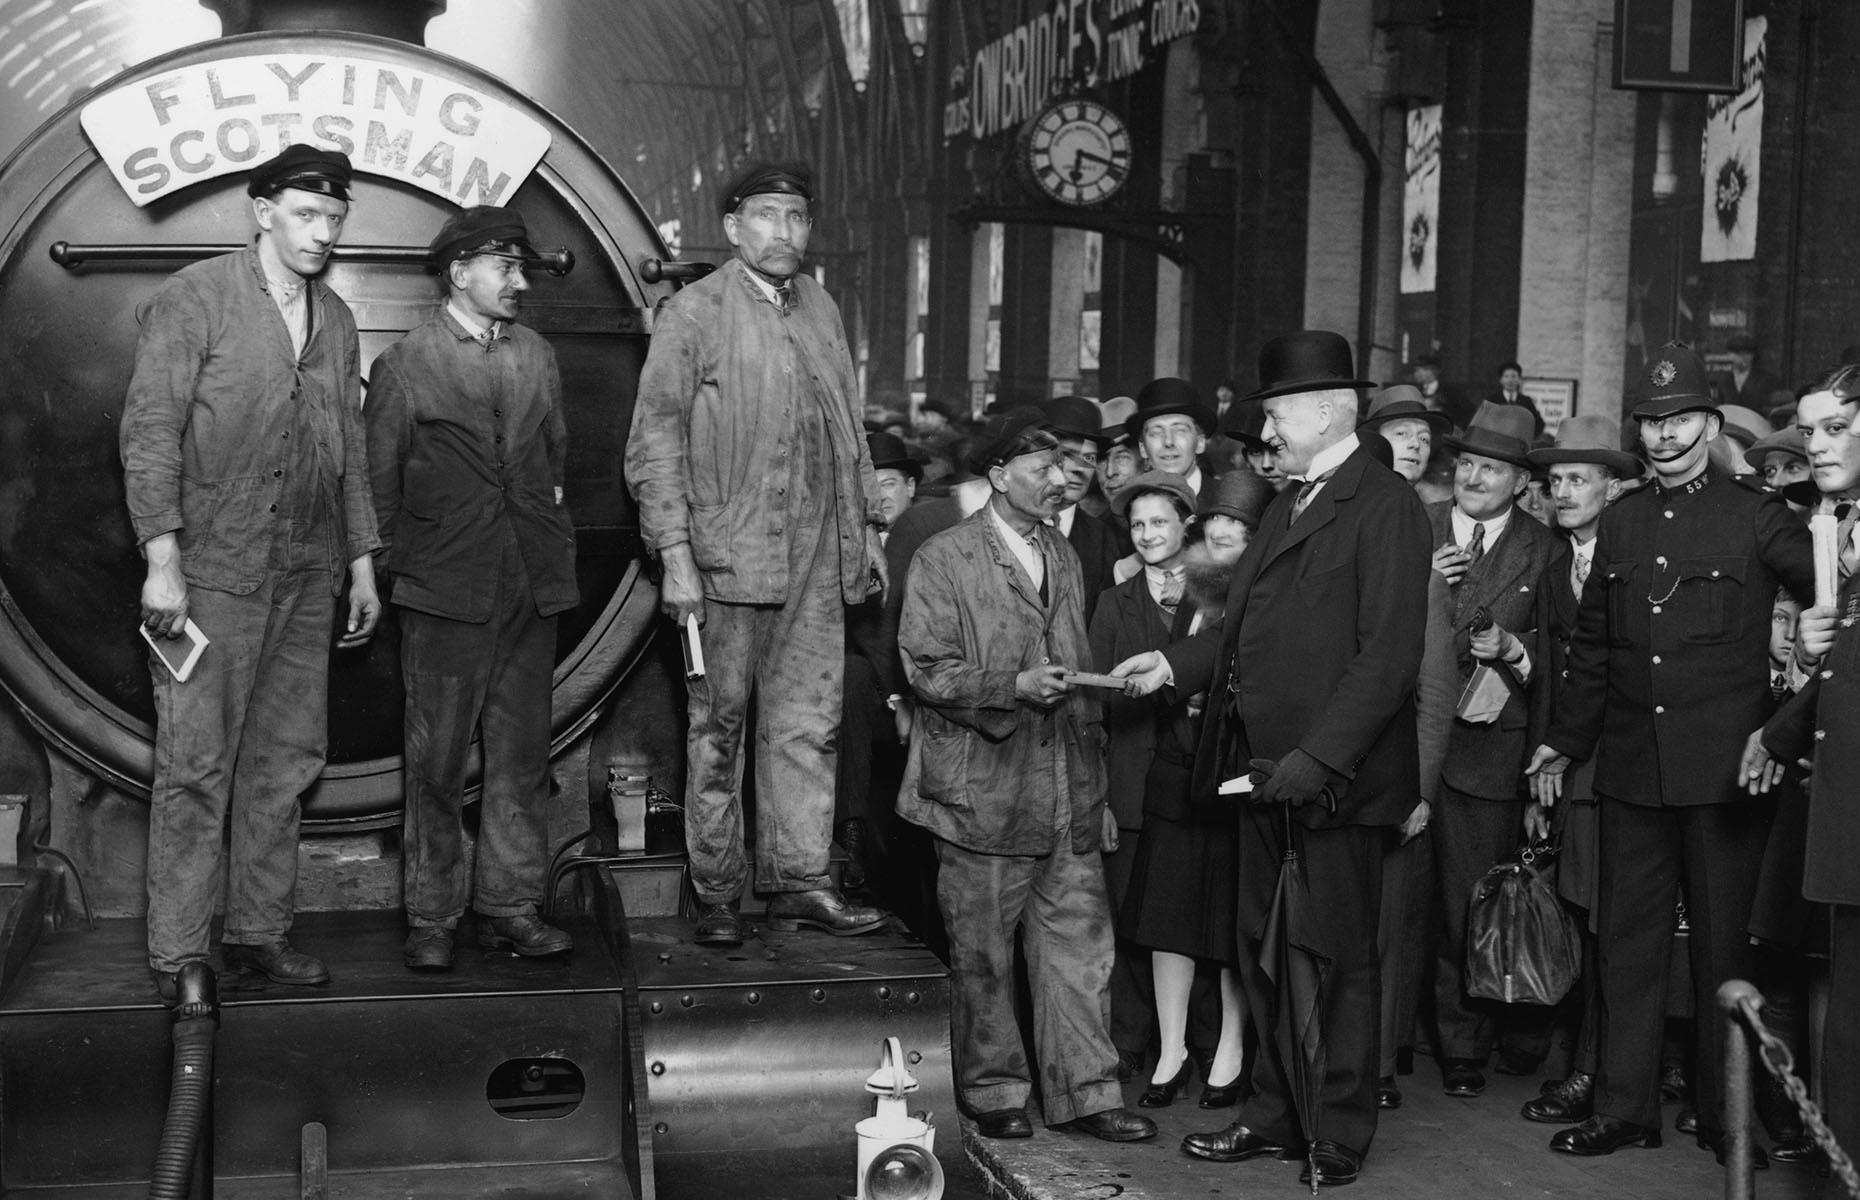 <p>One of Britain's most famous trains, the Flying Scotsman, embarked on its first journey in 1862, however, it wasn't until May 1928 that it completed its first non-stop service between Edinburgh and London. In this image captured at King's Cross Station in London, the train driver and firemen are presented with souvenirs to mark the occasion. This particular locomotive (LNER Class A3 4472) also set two steam locomotive world records, first reaching a speed of 100mph (161km/h) and then for the longest non-stop run of 442 miles (711km) while in Australia in 1989.</p>